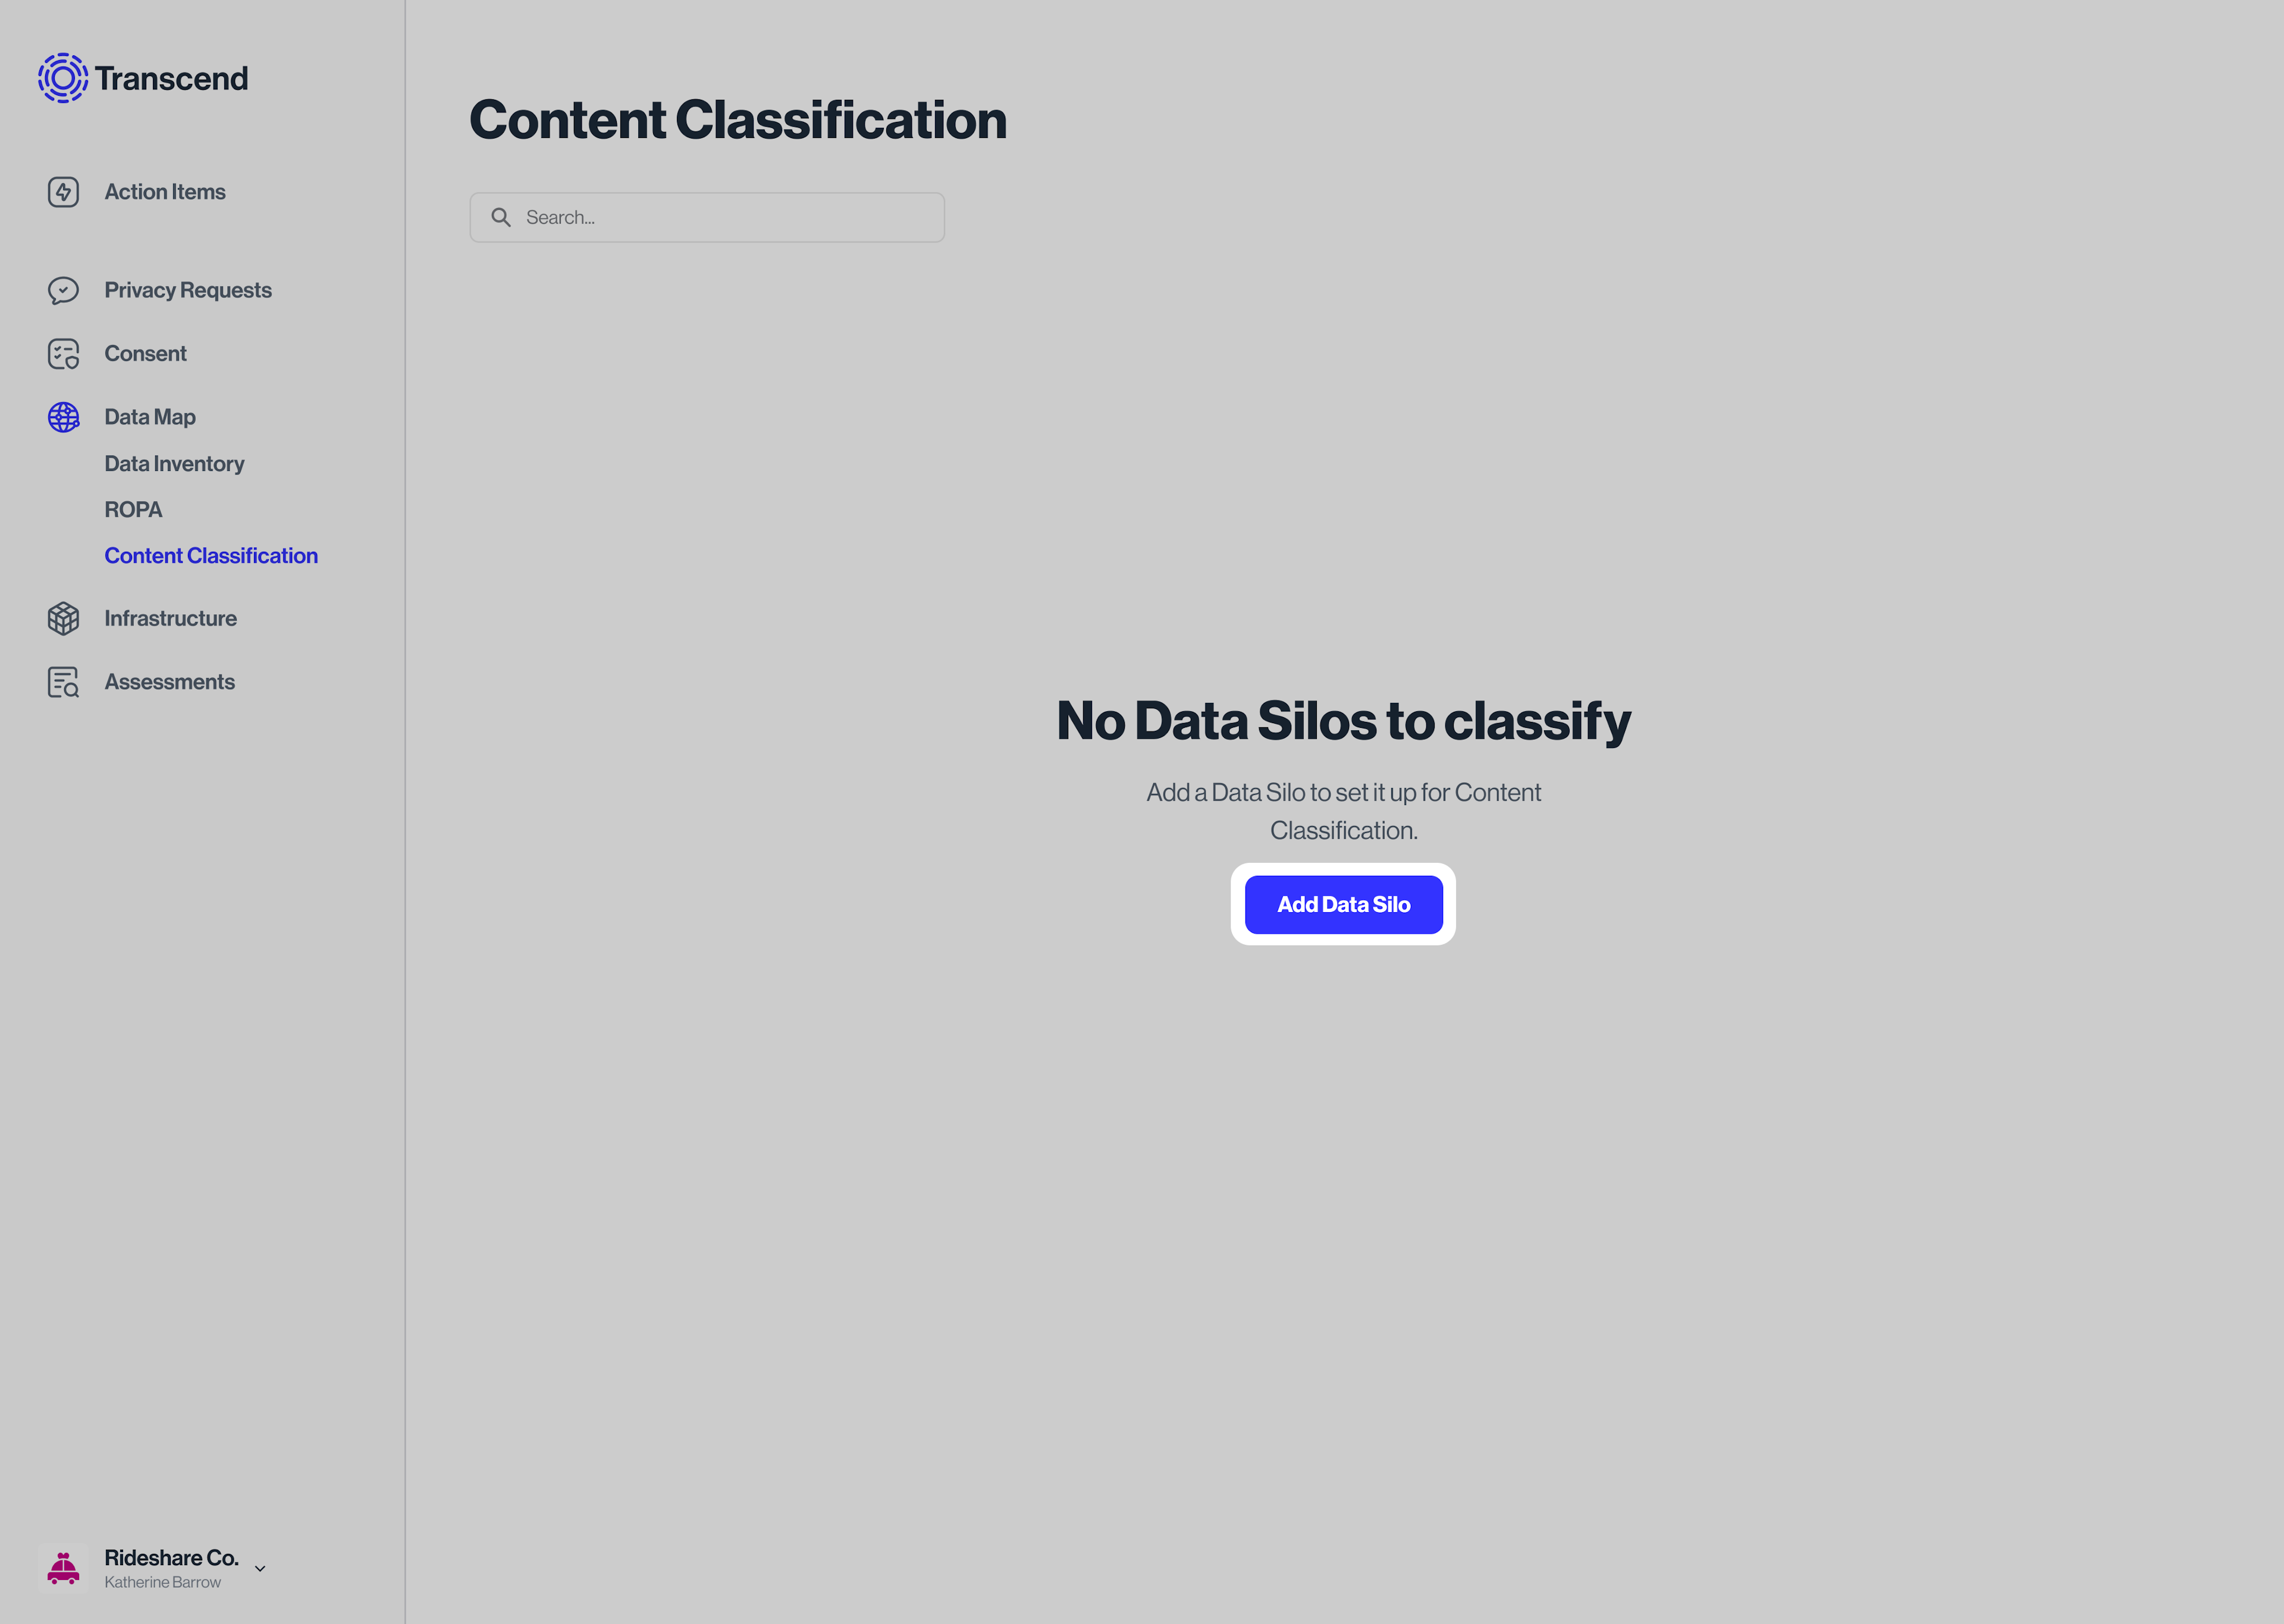 Adding a data silo to Transcend Data Mapping for Content Classification